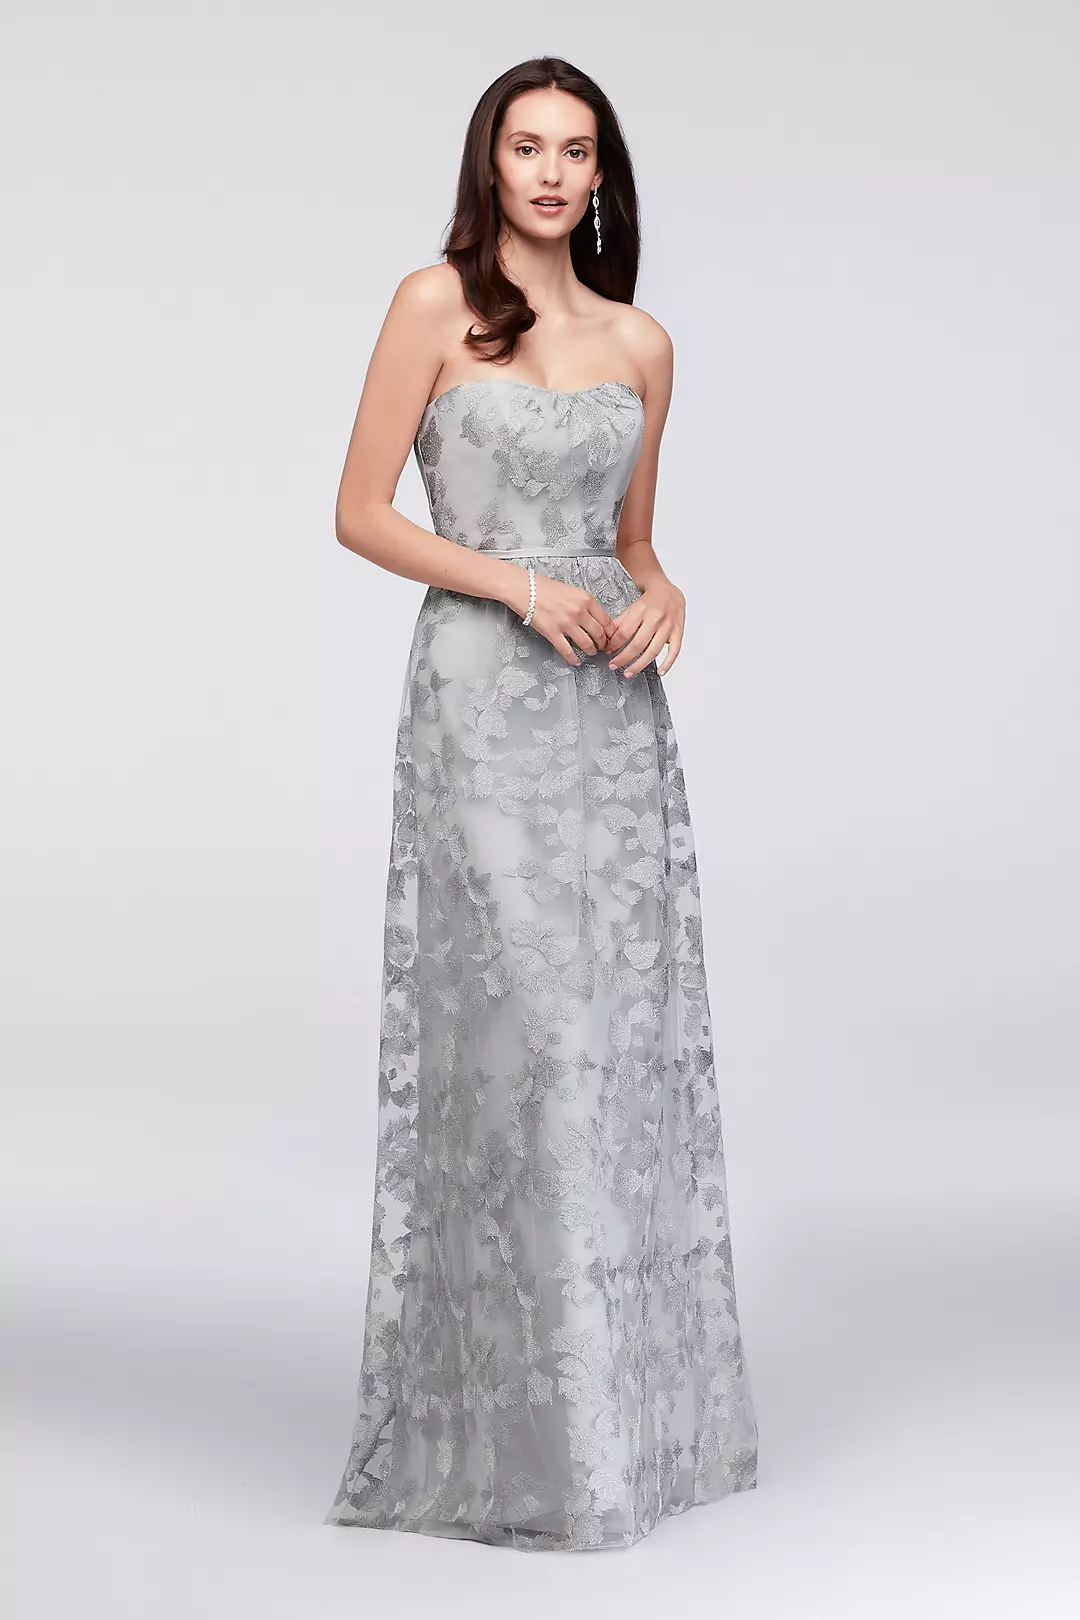 Embroidered Long Strapless Bridesmaid Dress Image